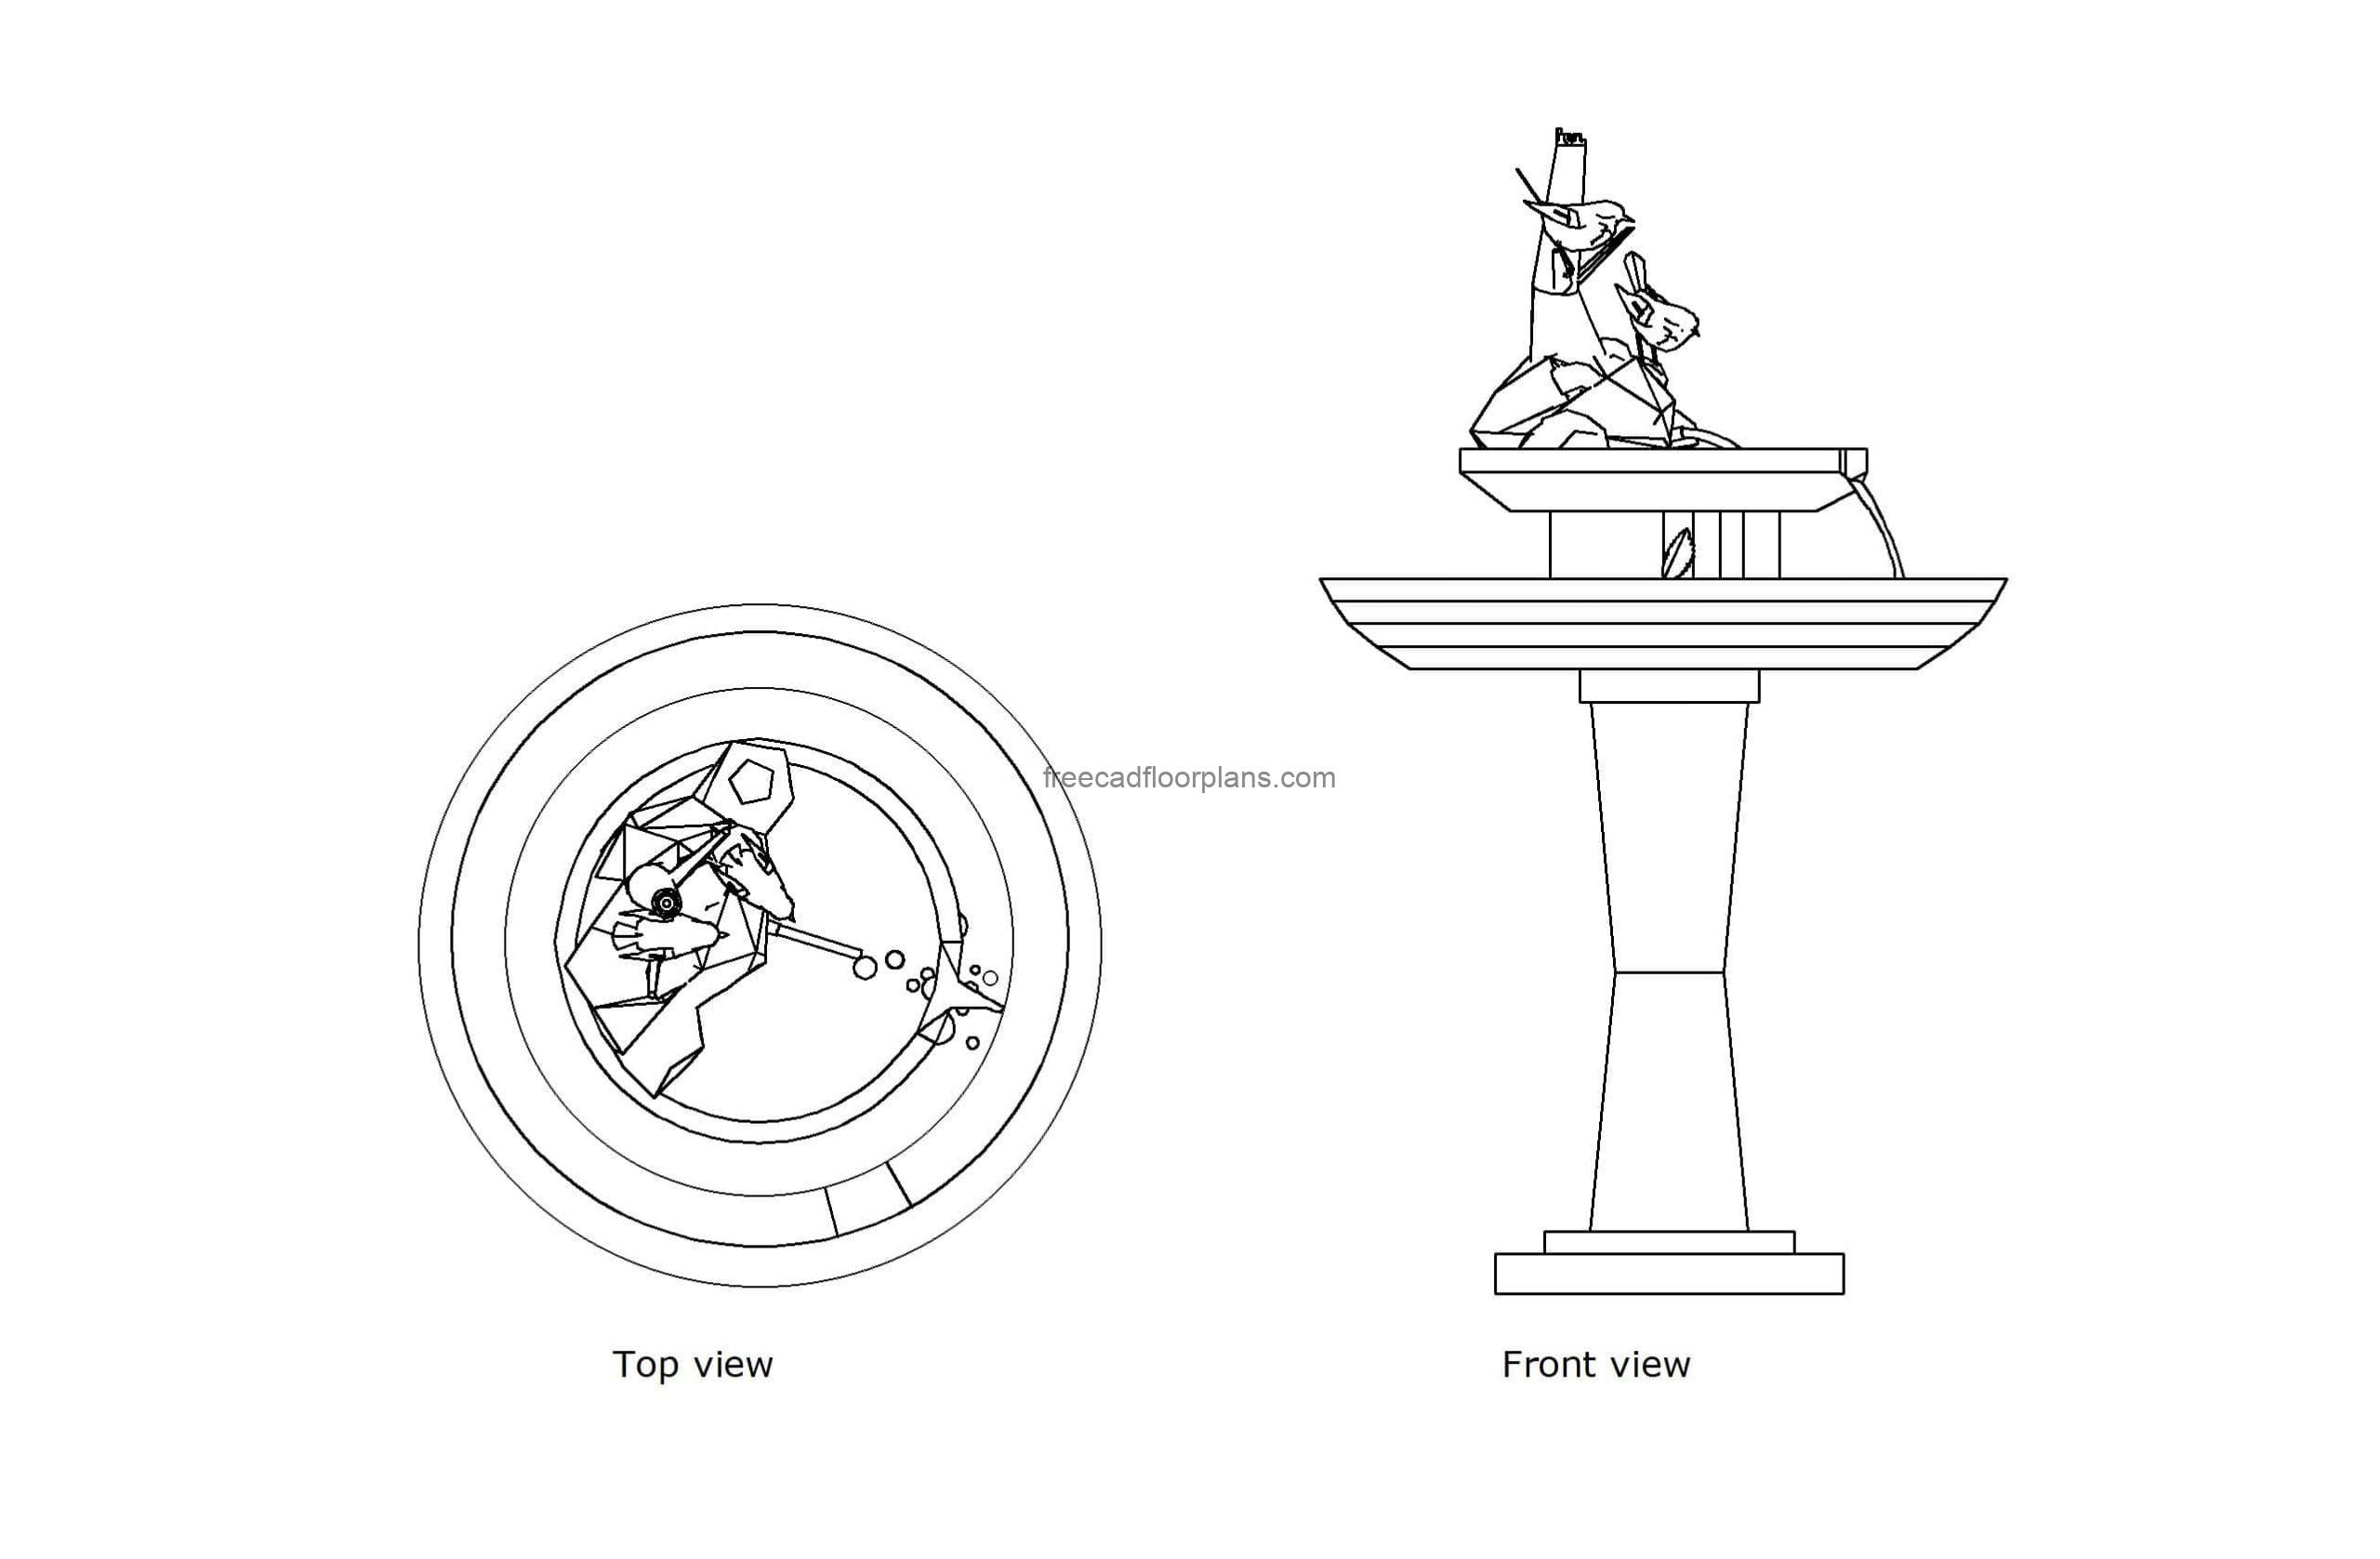 autocad drawing of a bird bath fountain, plan and elevation 2d views, dwg file free for download